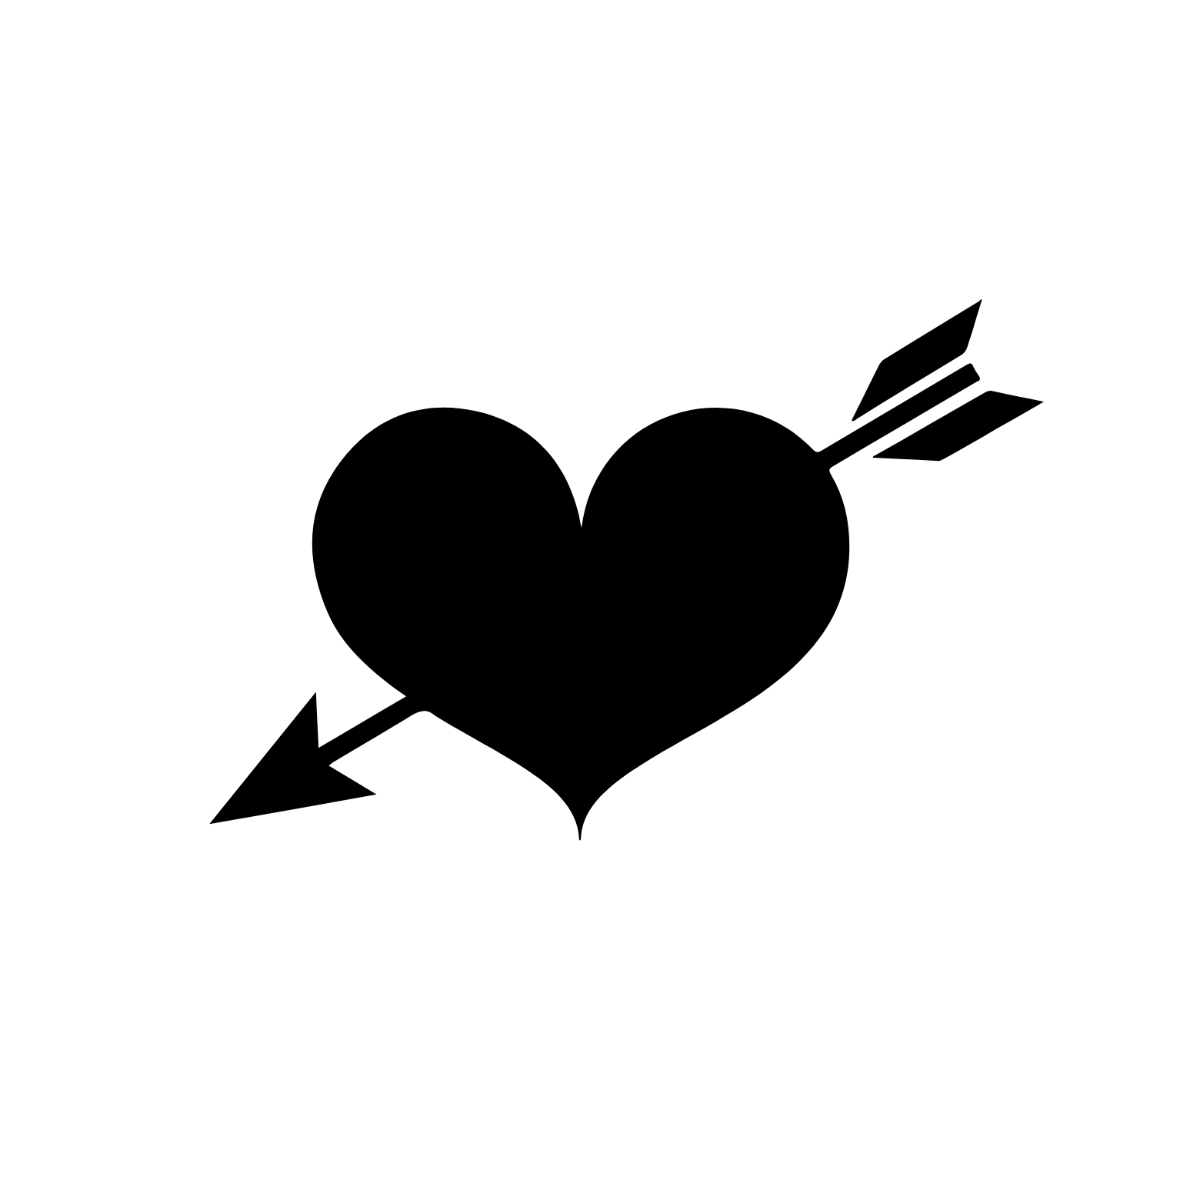 Black Heart with Arrow Silhouette Template